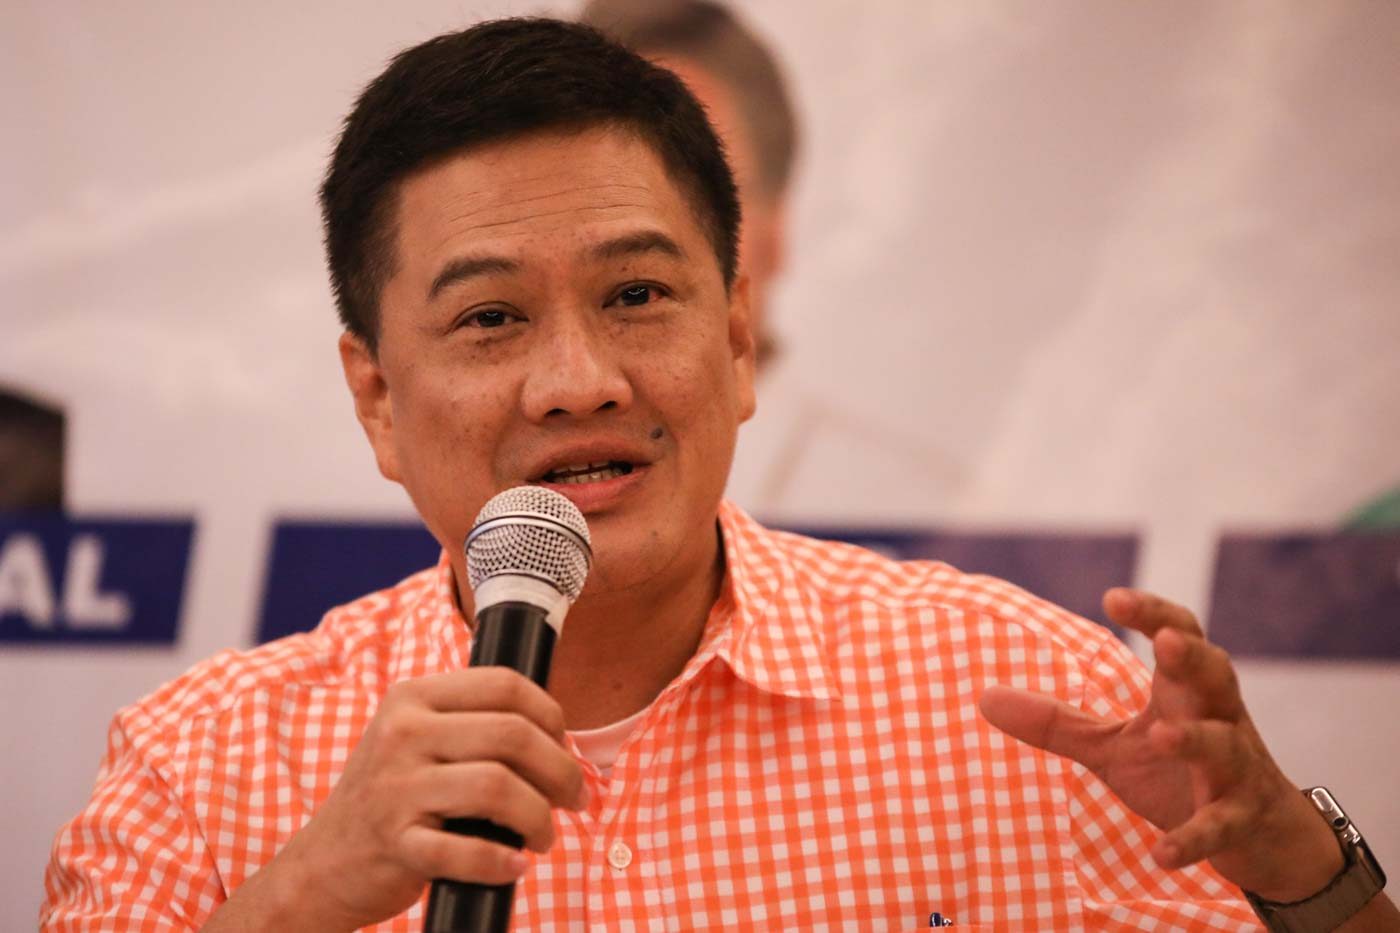 THE FRIEND OF LABORERS. Ex-Quezon congressman Erin Tañada wants to fight for Filipino laborers and farmers if he wins as senator. Photo by Darren Langit/Rappler  